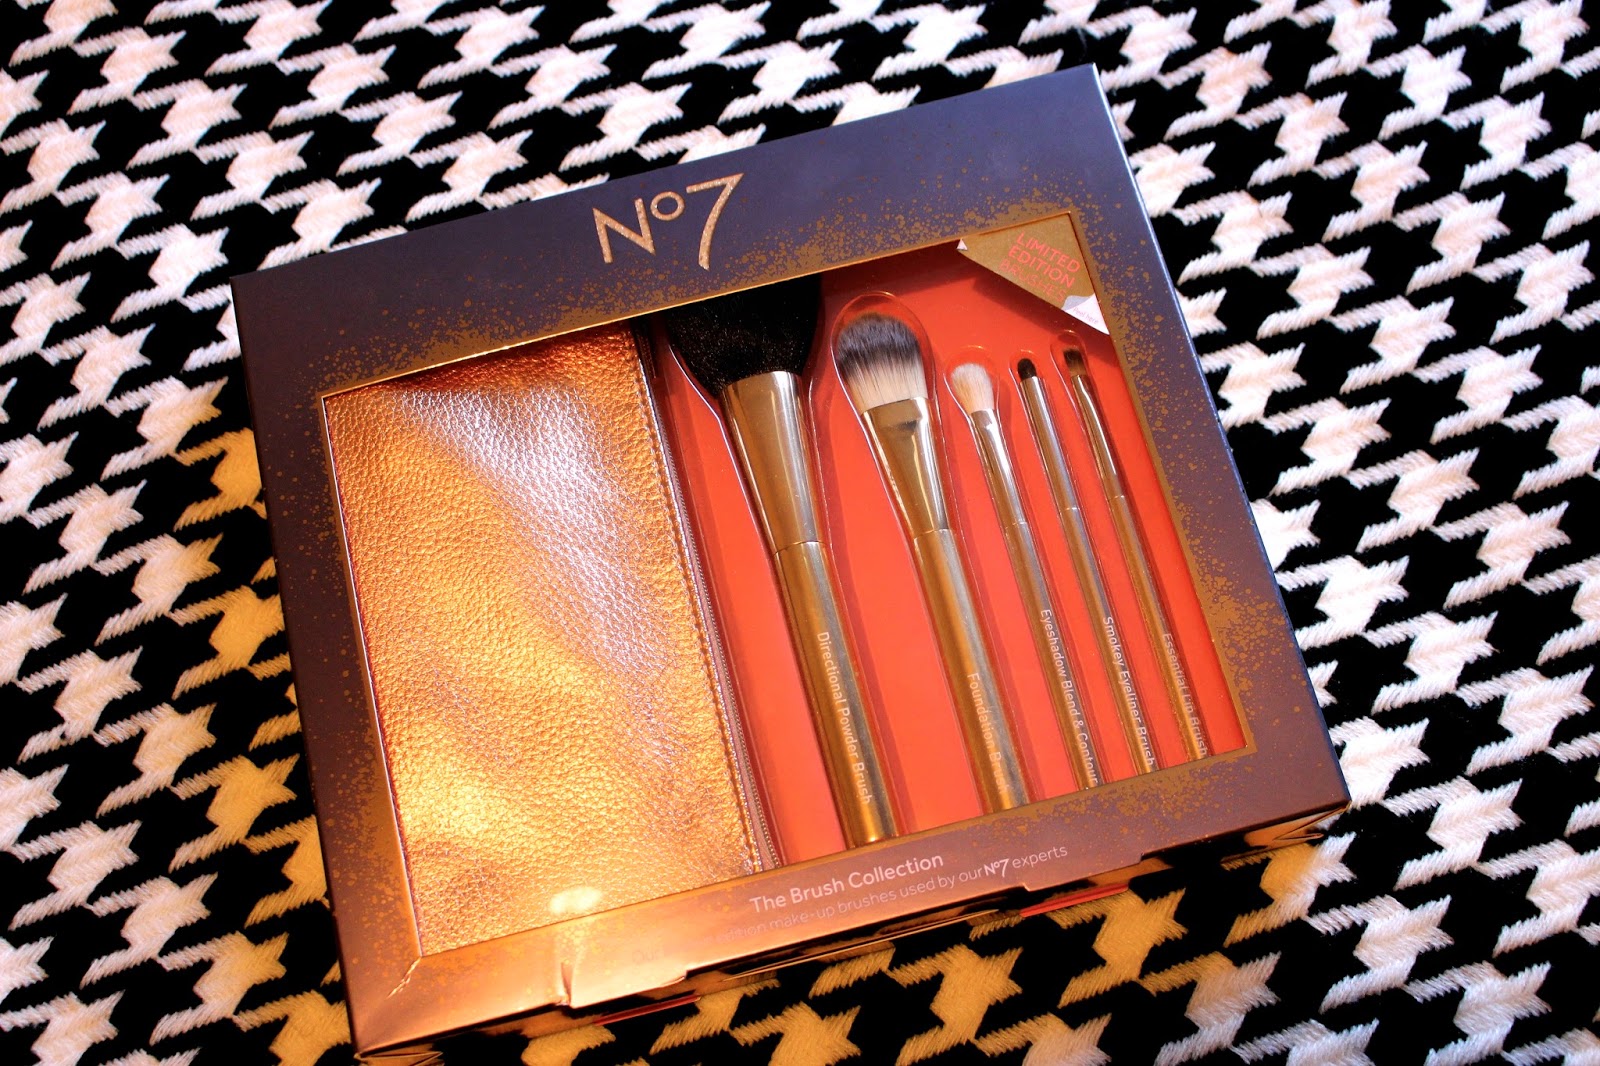 Not Your Average: No7 Brush Collection